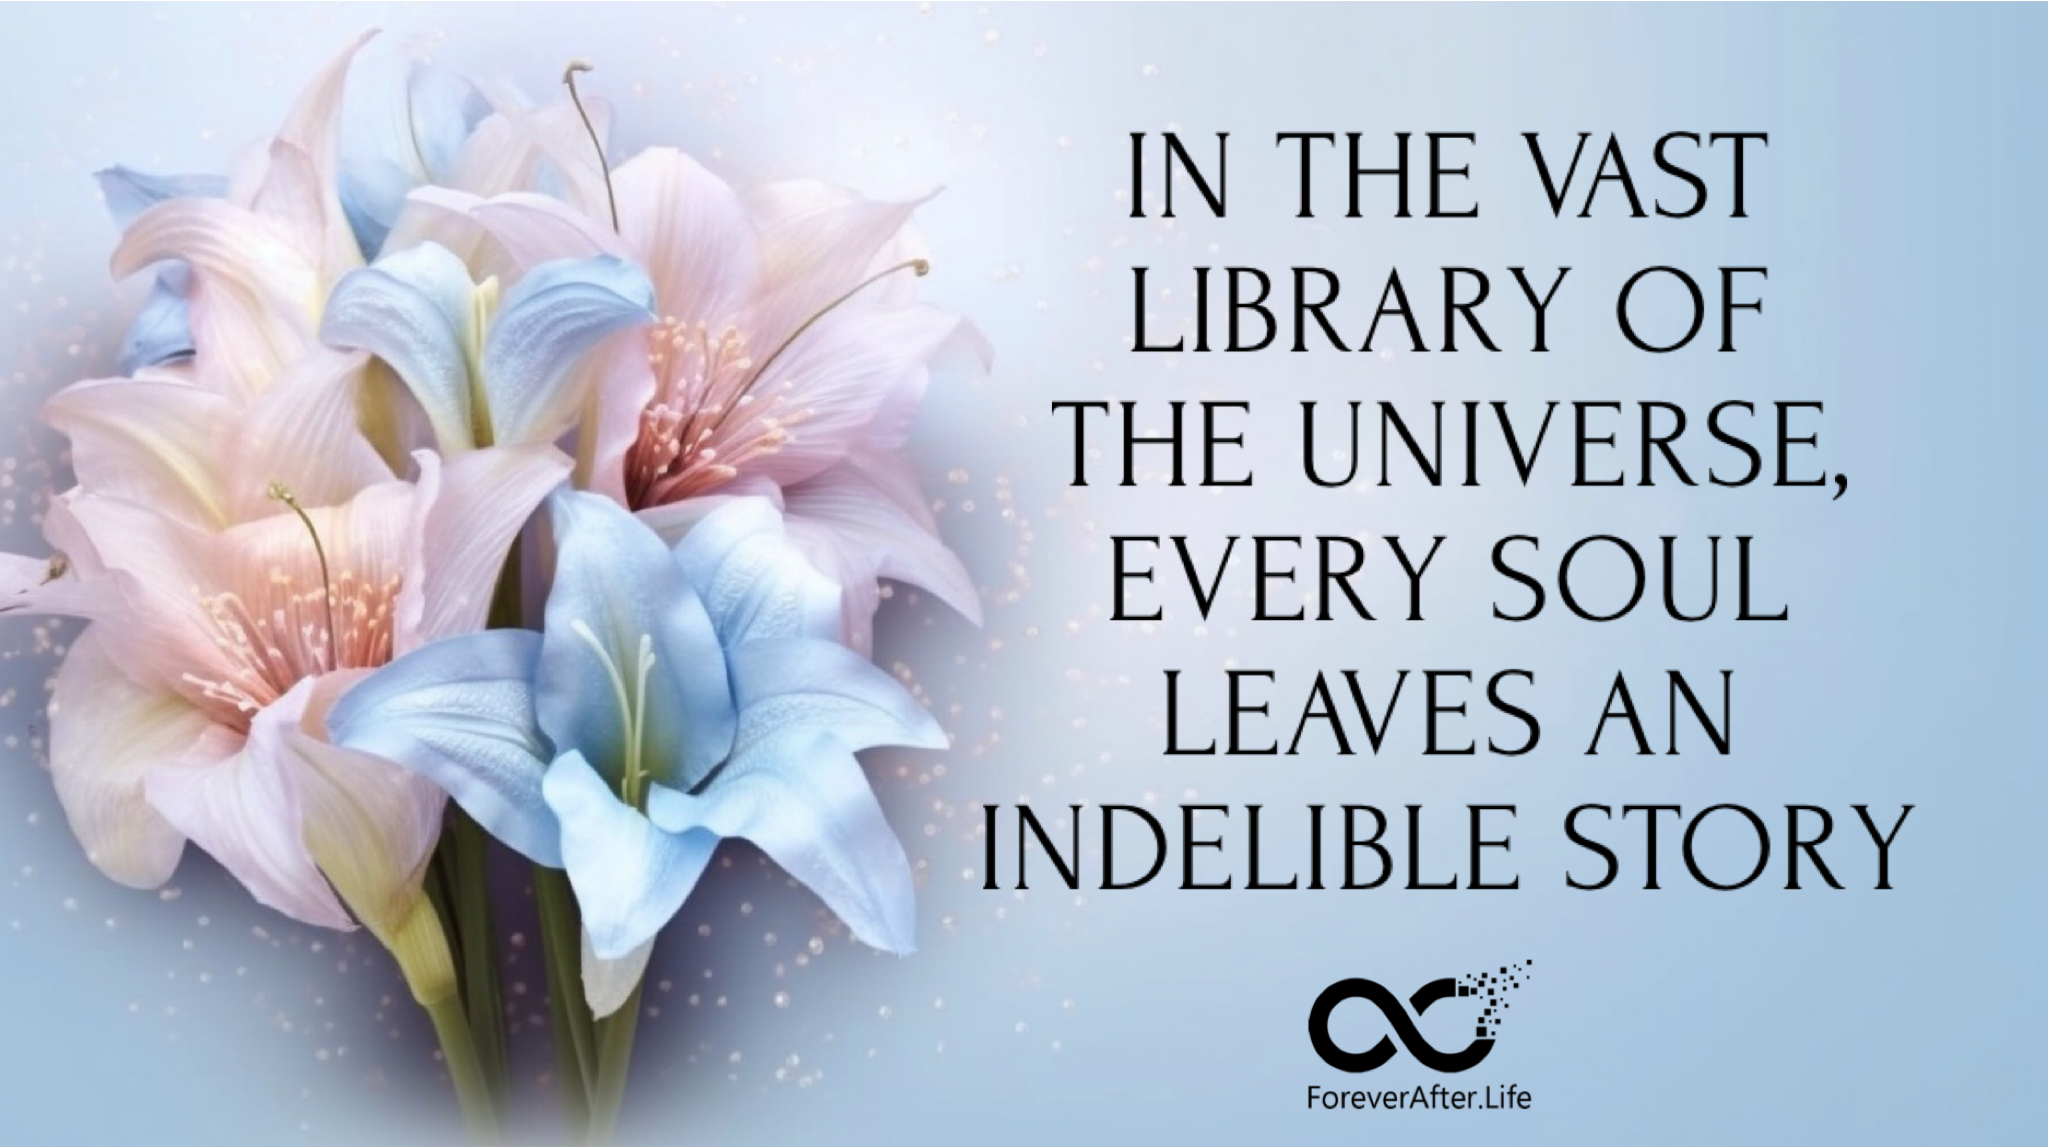 In the vast library of the universe, every soul leaves an indelible story